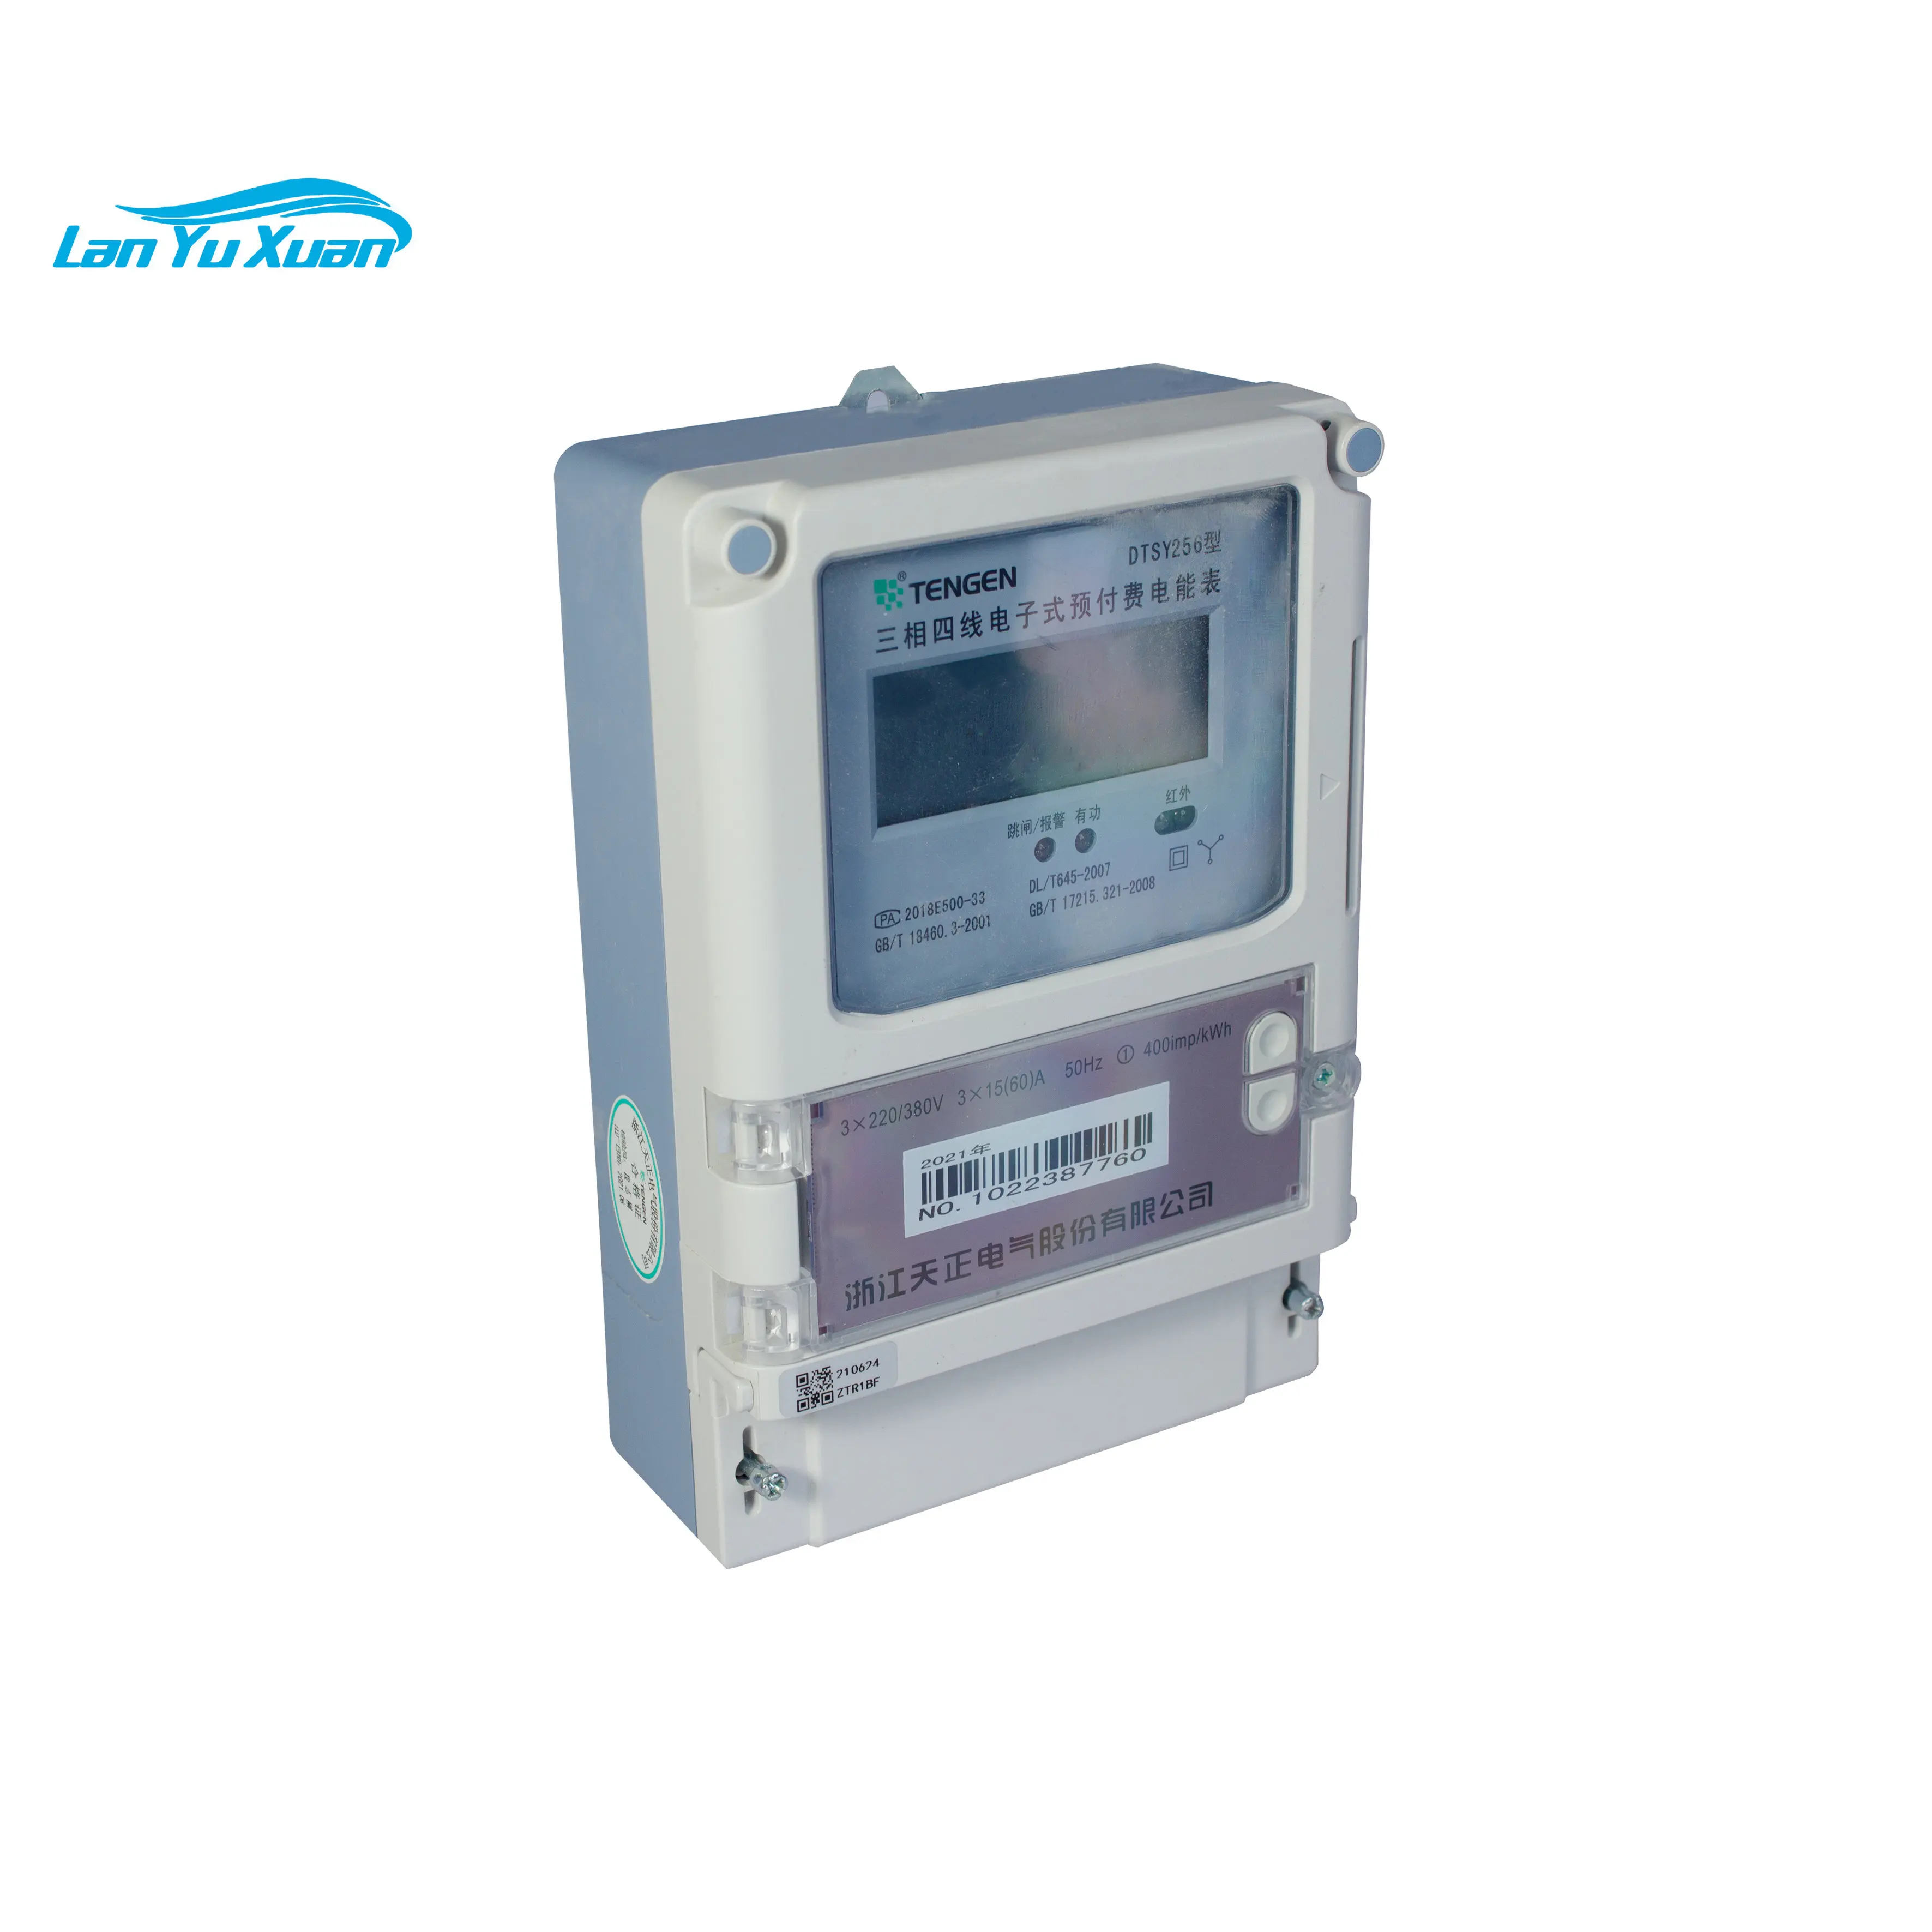 

Factory Eco-Friendly Three Phase Smart Prepaid Energy Meter With Smart Management System